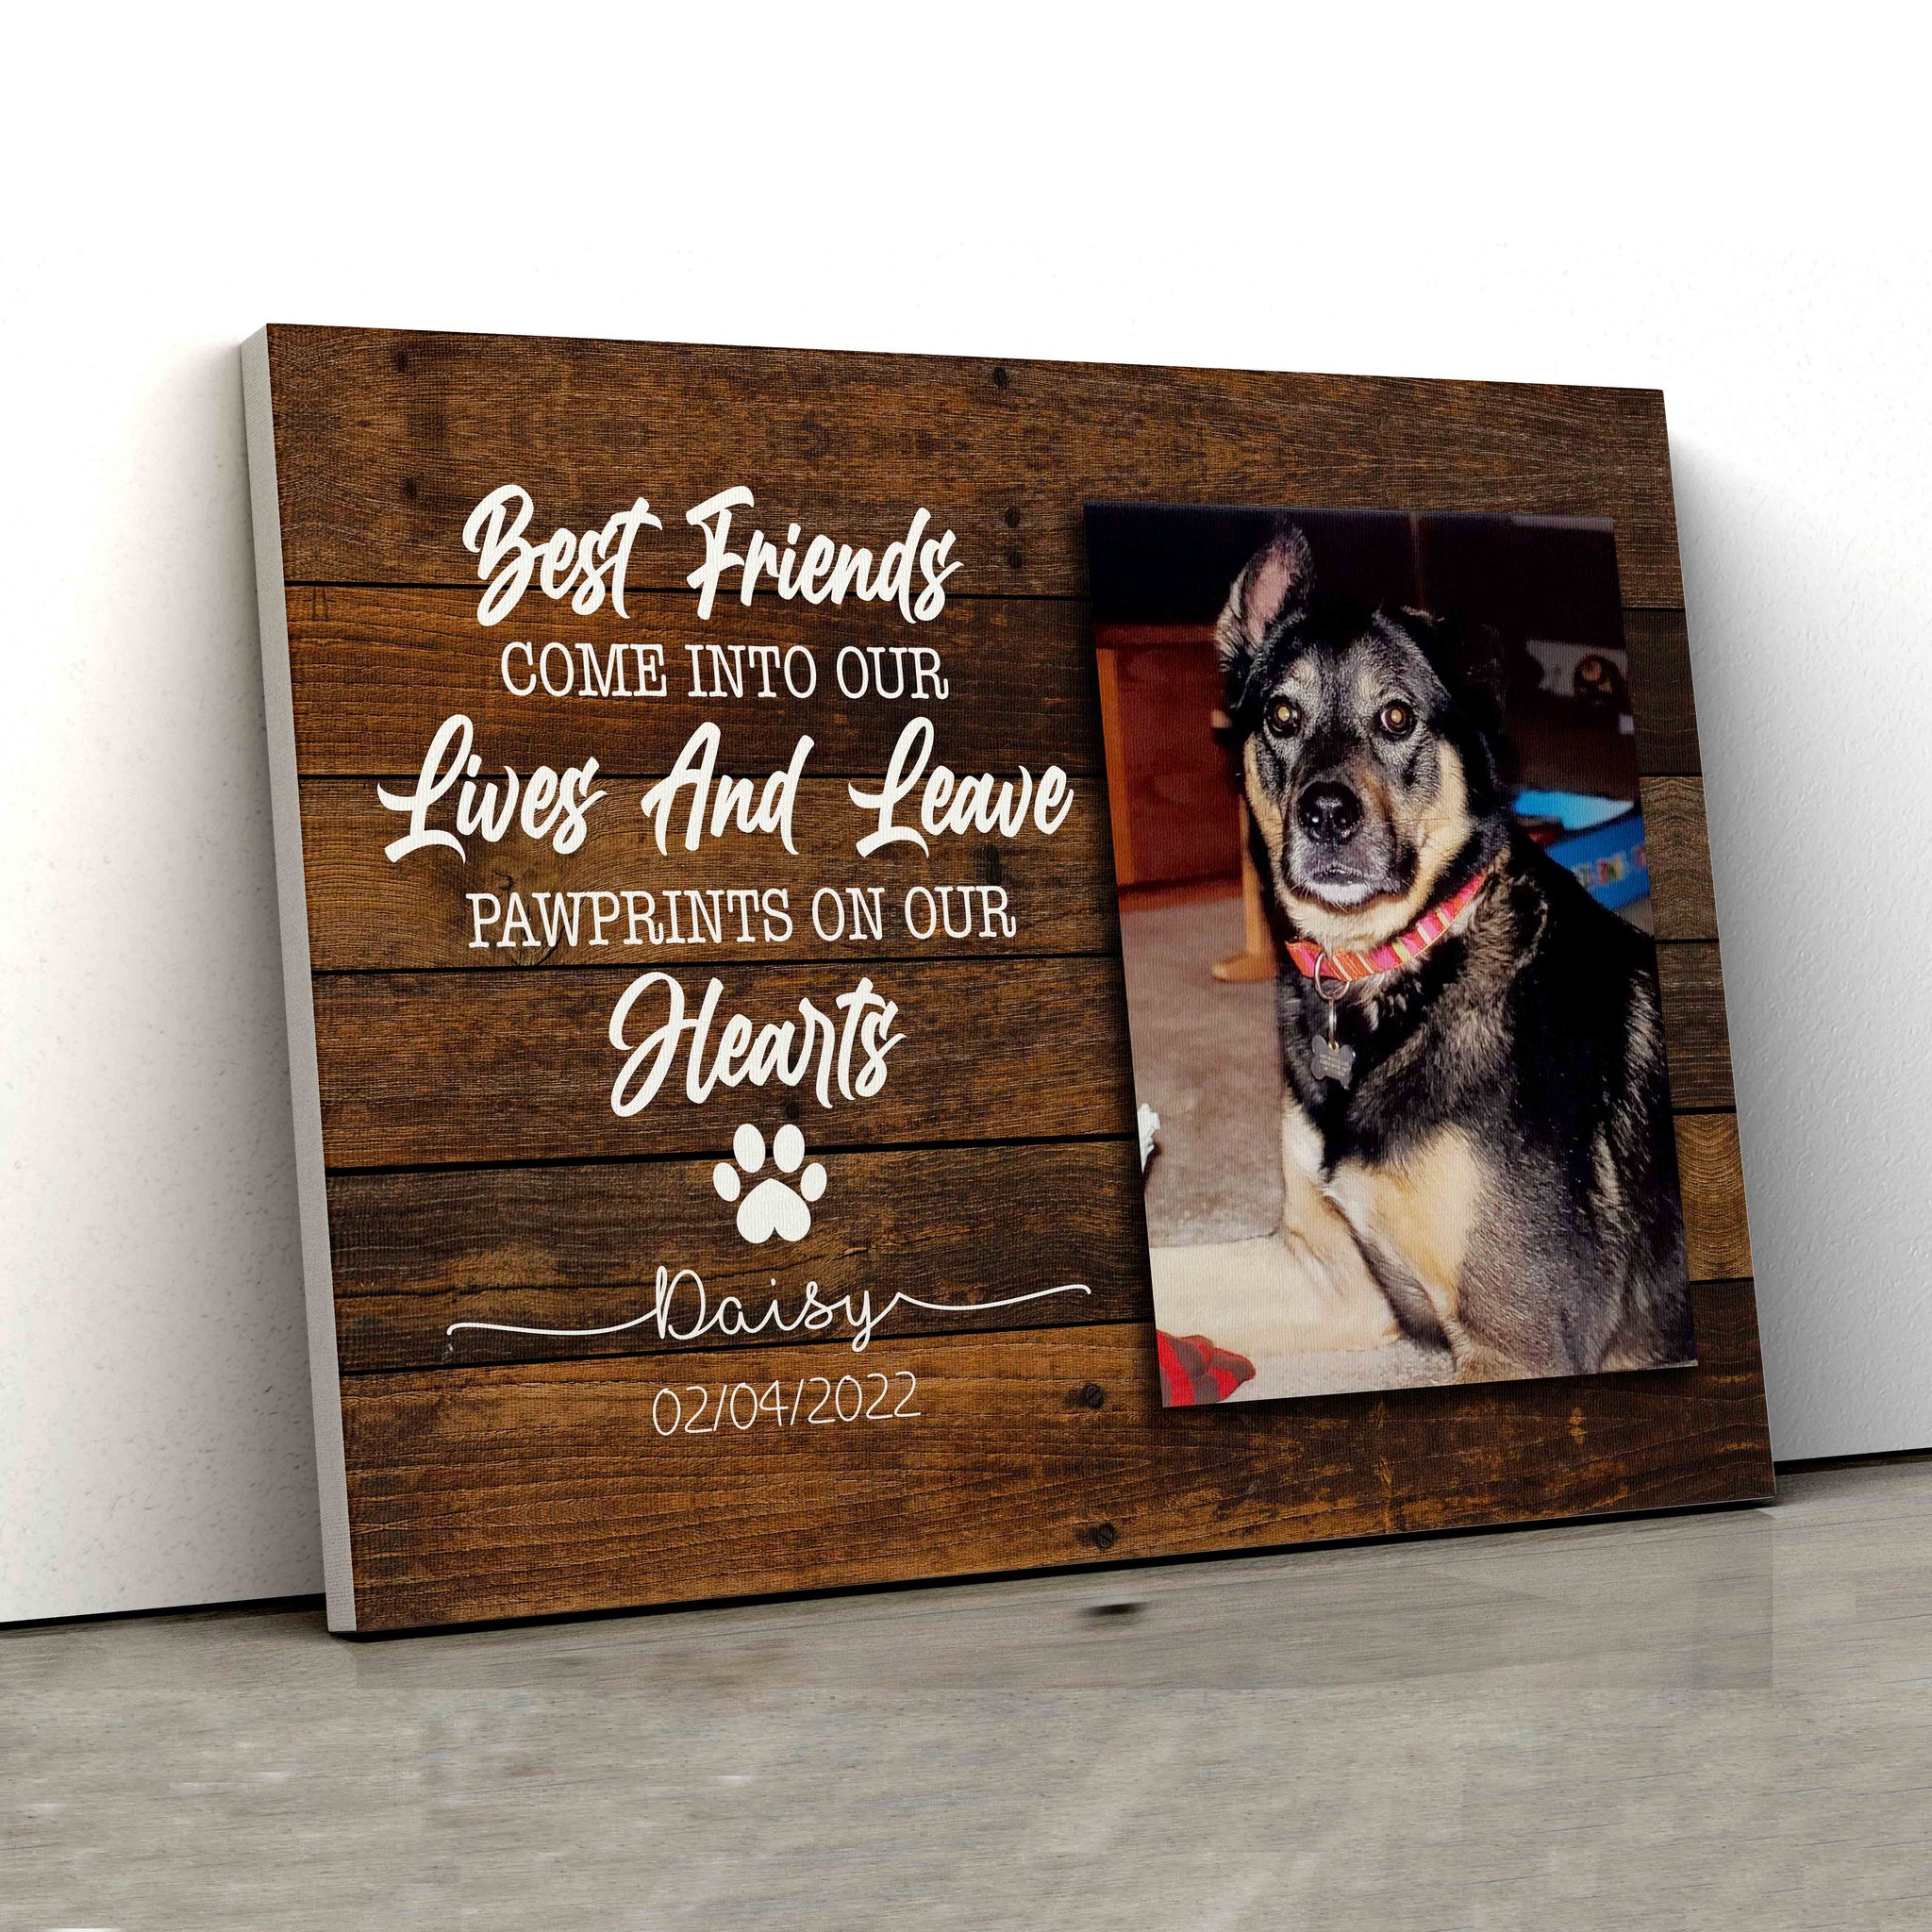 Best Friends Come Into Our Canvas, Personalized Image Canvas, Pet Memorial Canvas, Custom Name Canvas